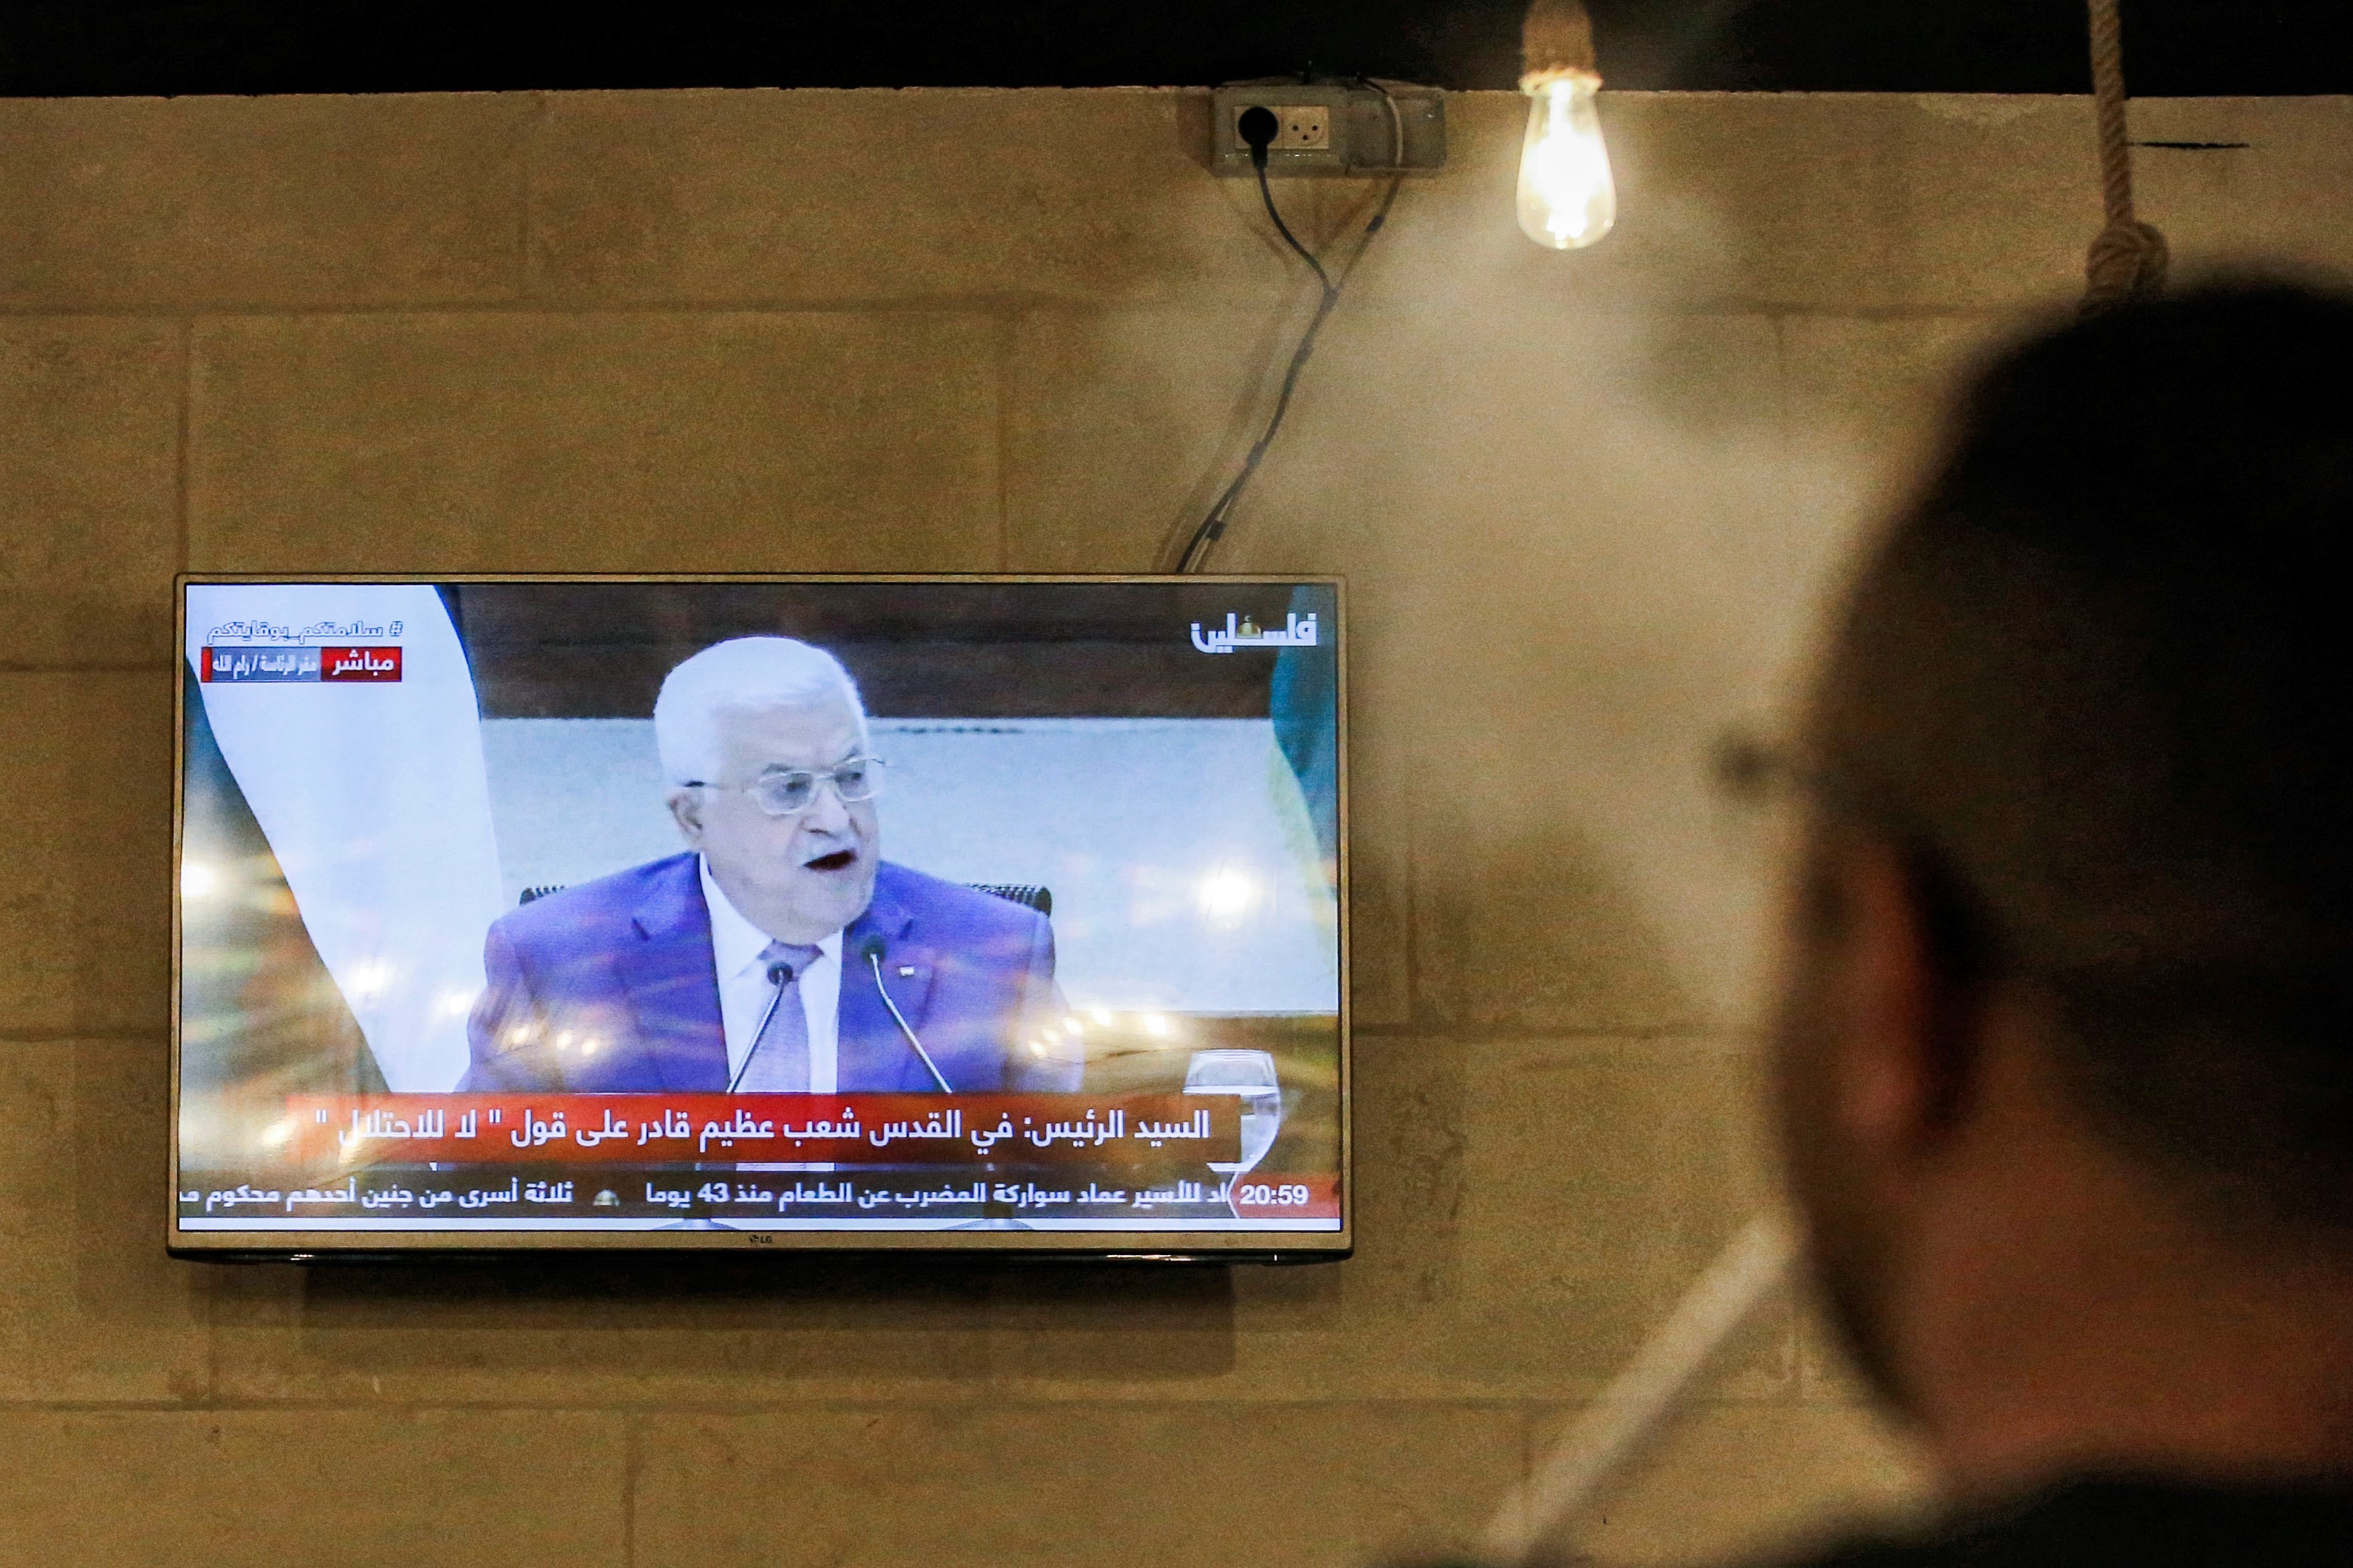 People watch a televised speech by Palestinian president Mahmud Abbas regarding the upcoming Palestinian elections at a coffee shop in the city of Hebron in the occupied West Bank on April 29, 2021.